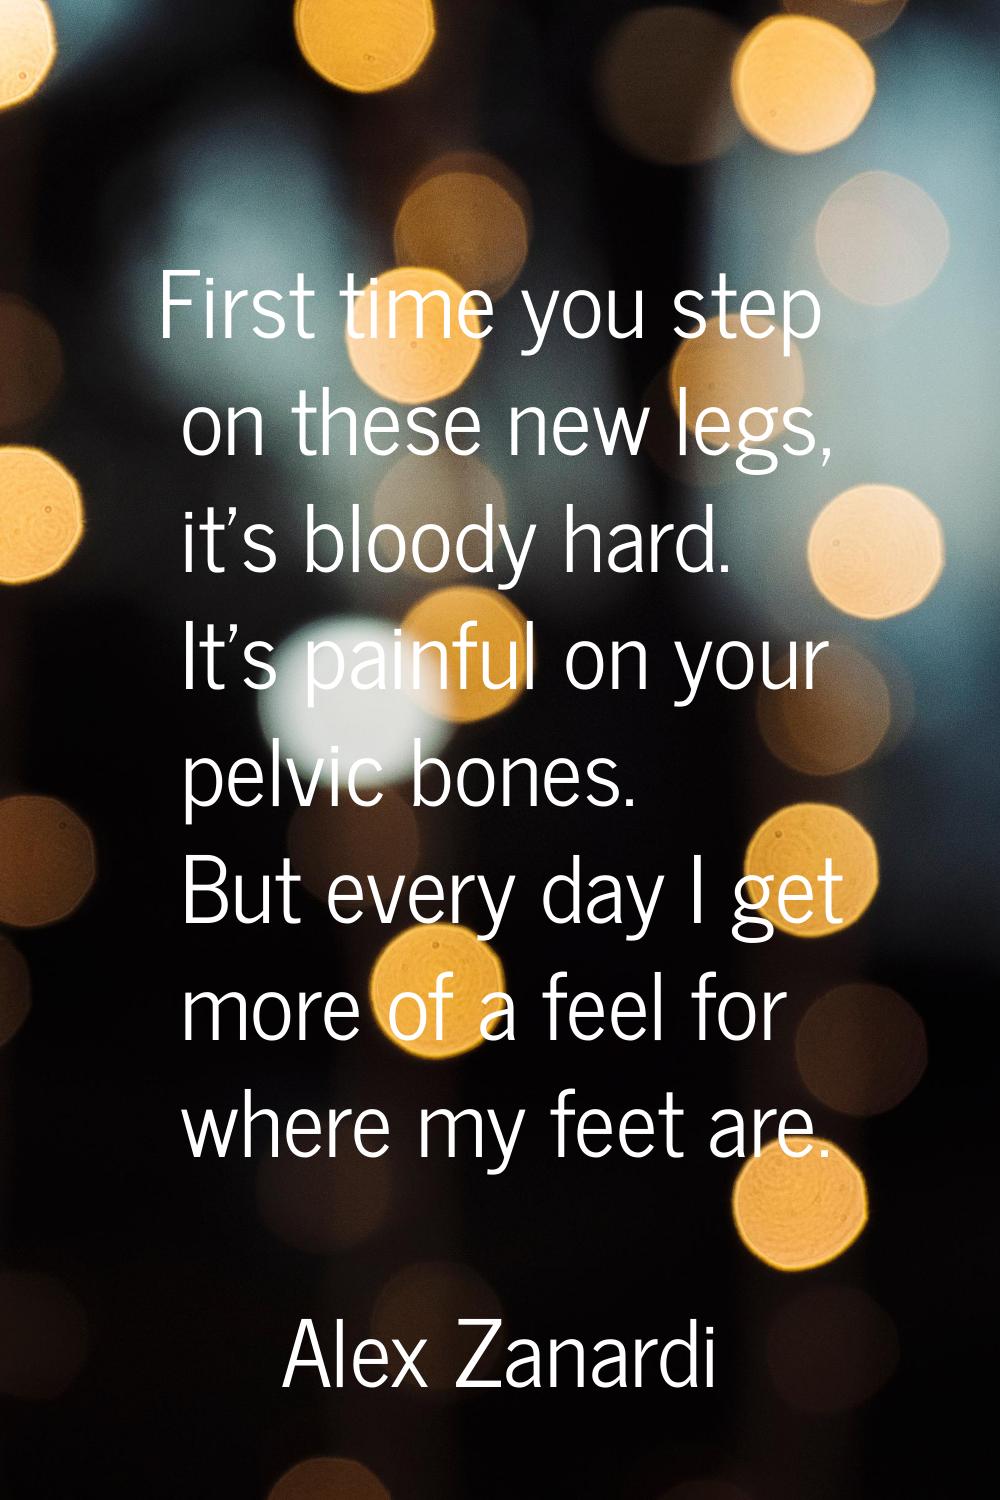 First time you step on these new legs, it's bloody hard. It's painful on your pelvic bones. But eve